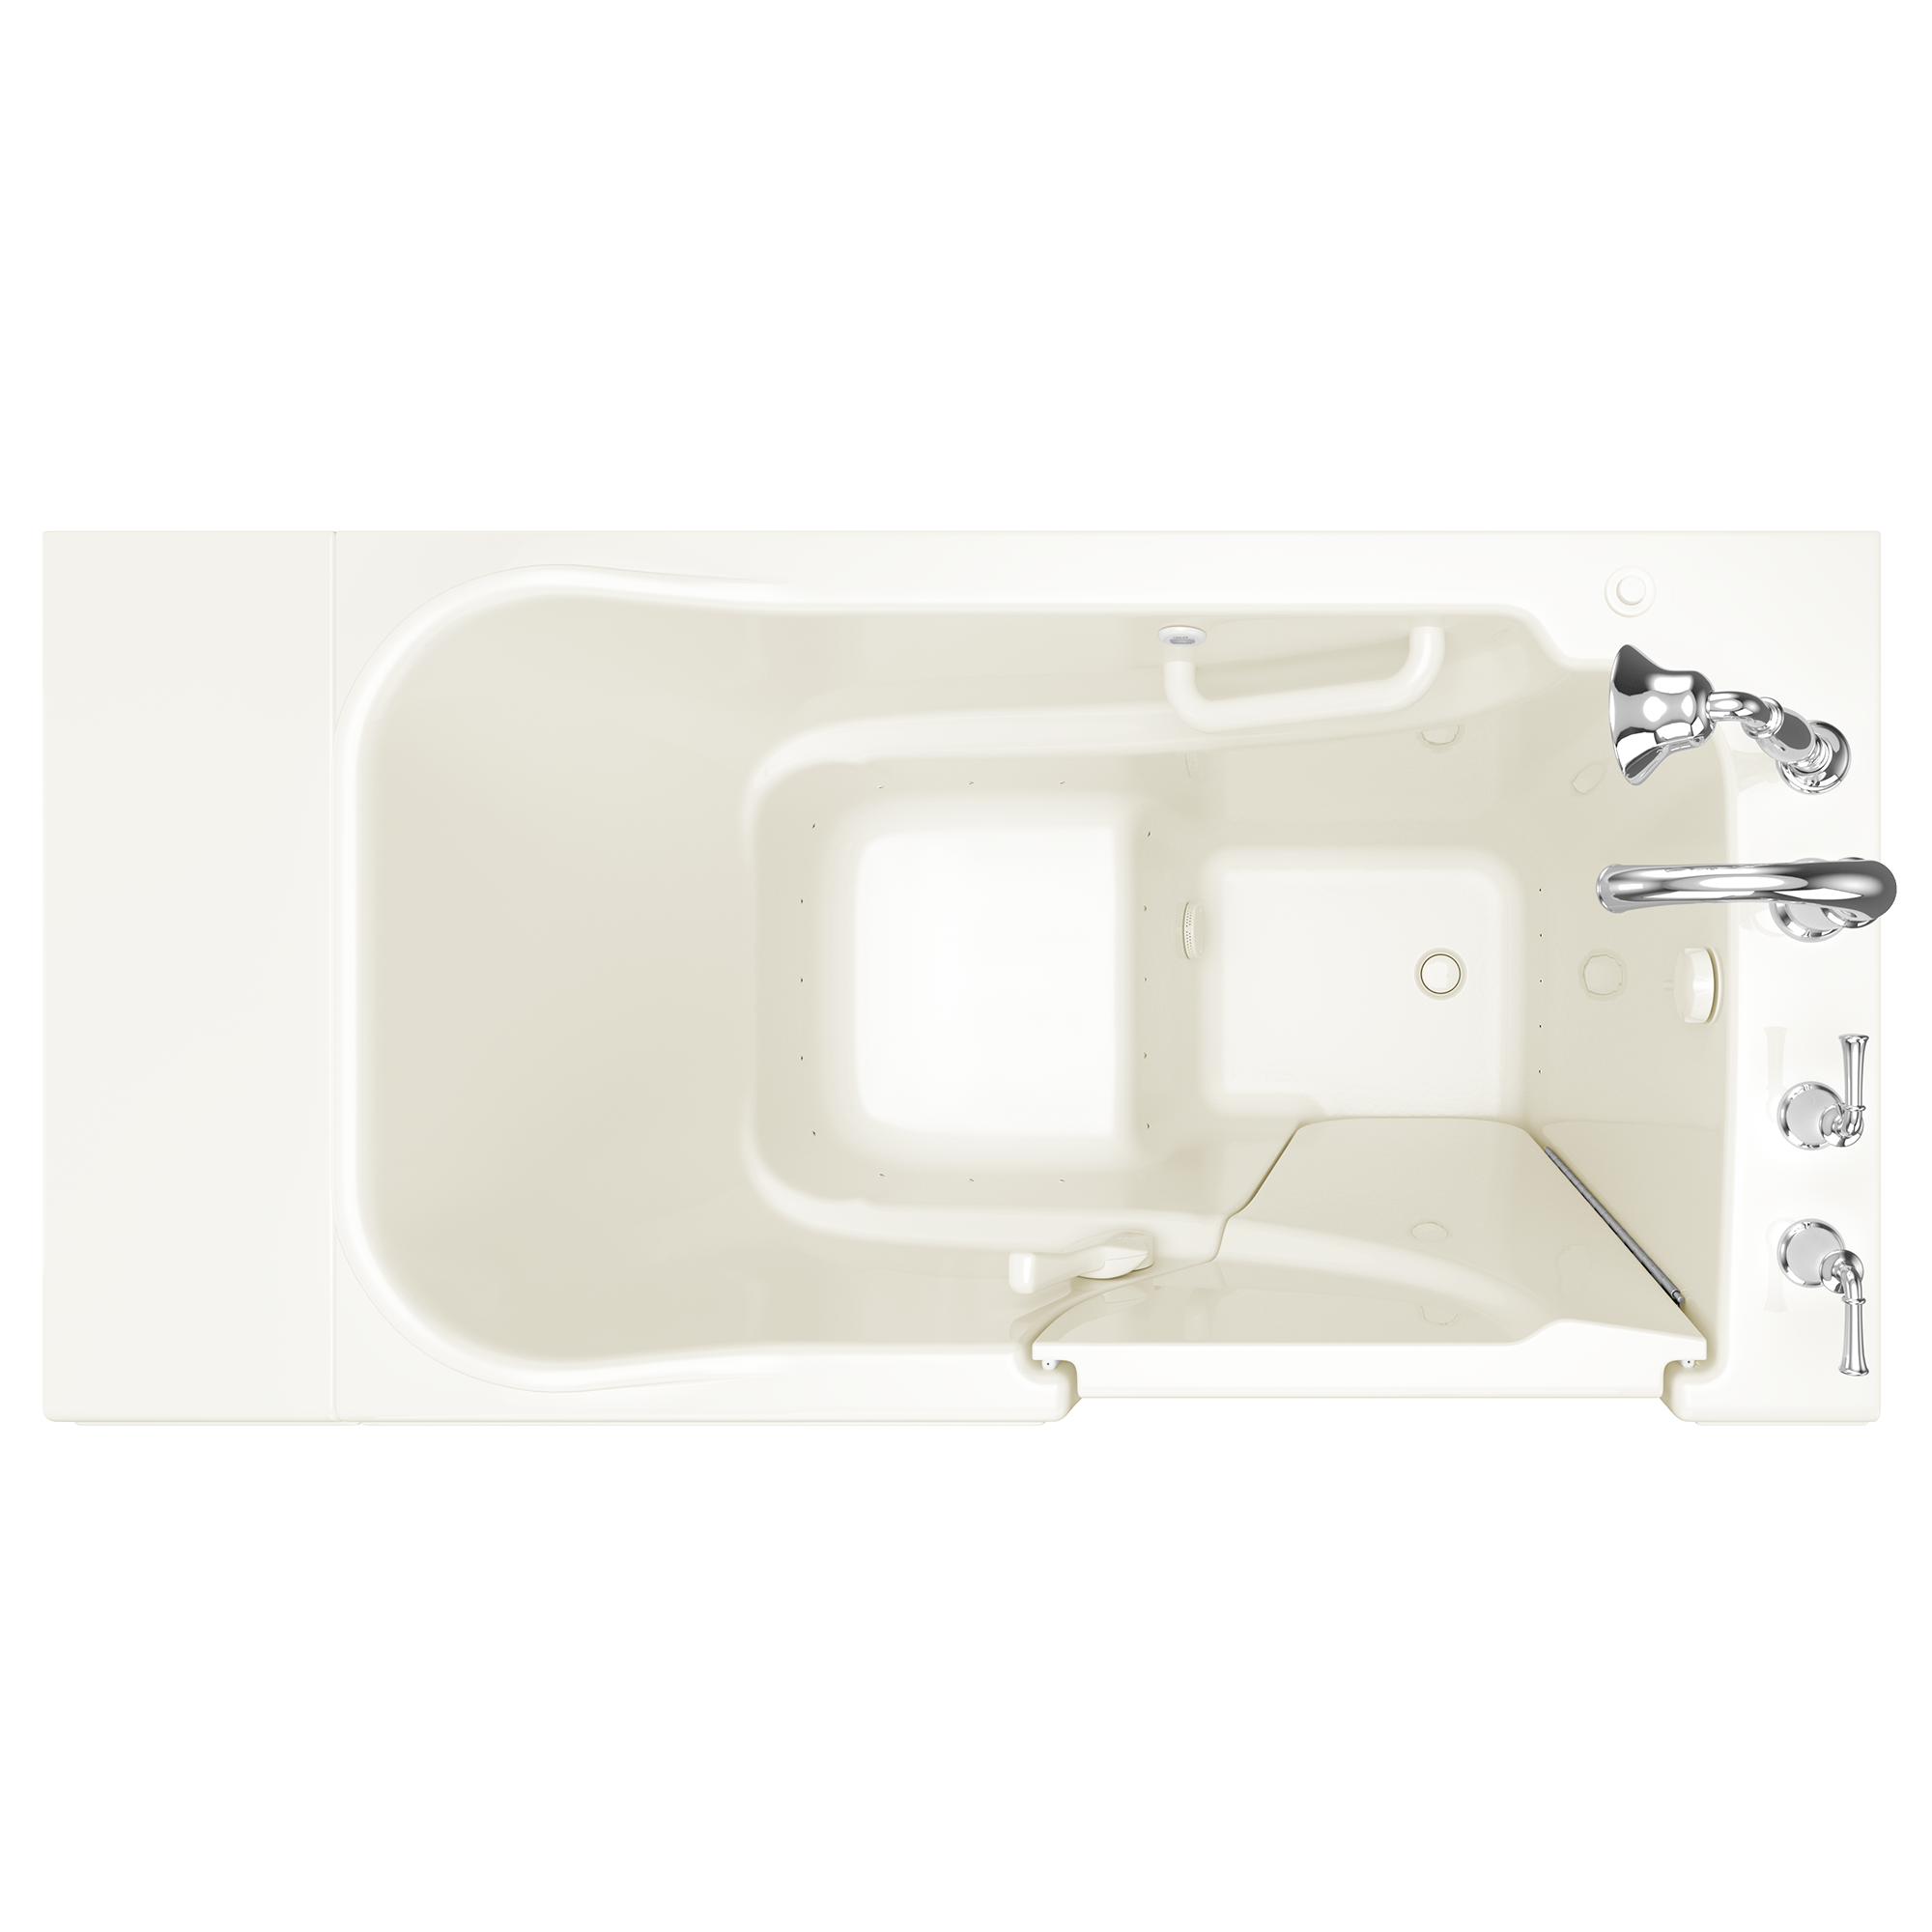 Gelcoat Value Series 30x52 Inch Walk-In Bathtub with Air Spa System - Right Hand Door and Drain